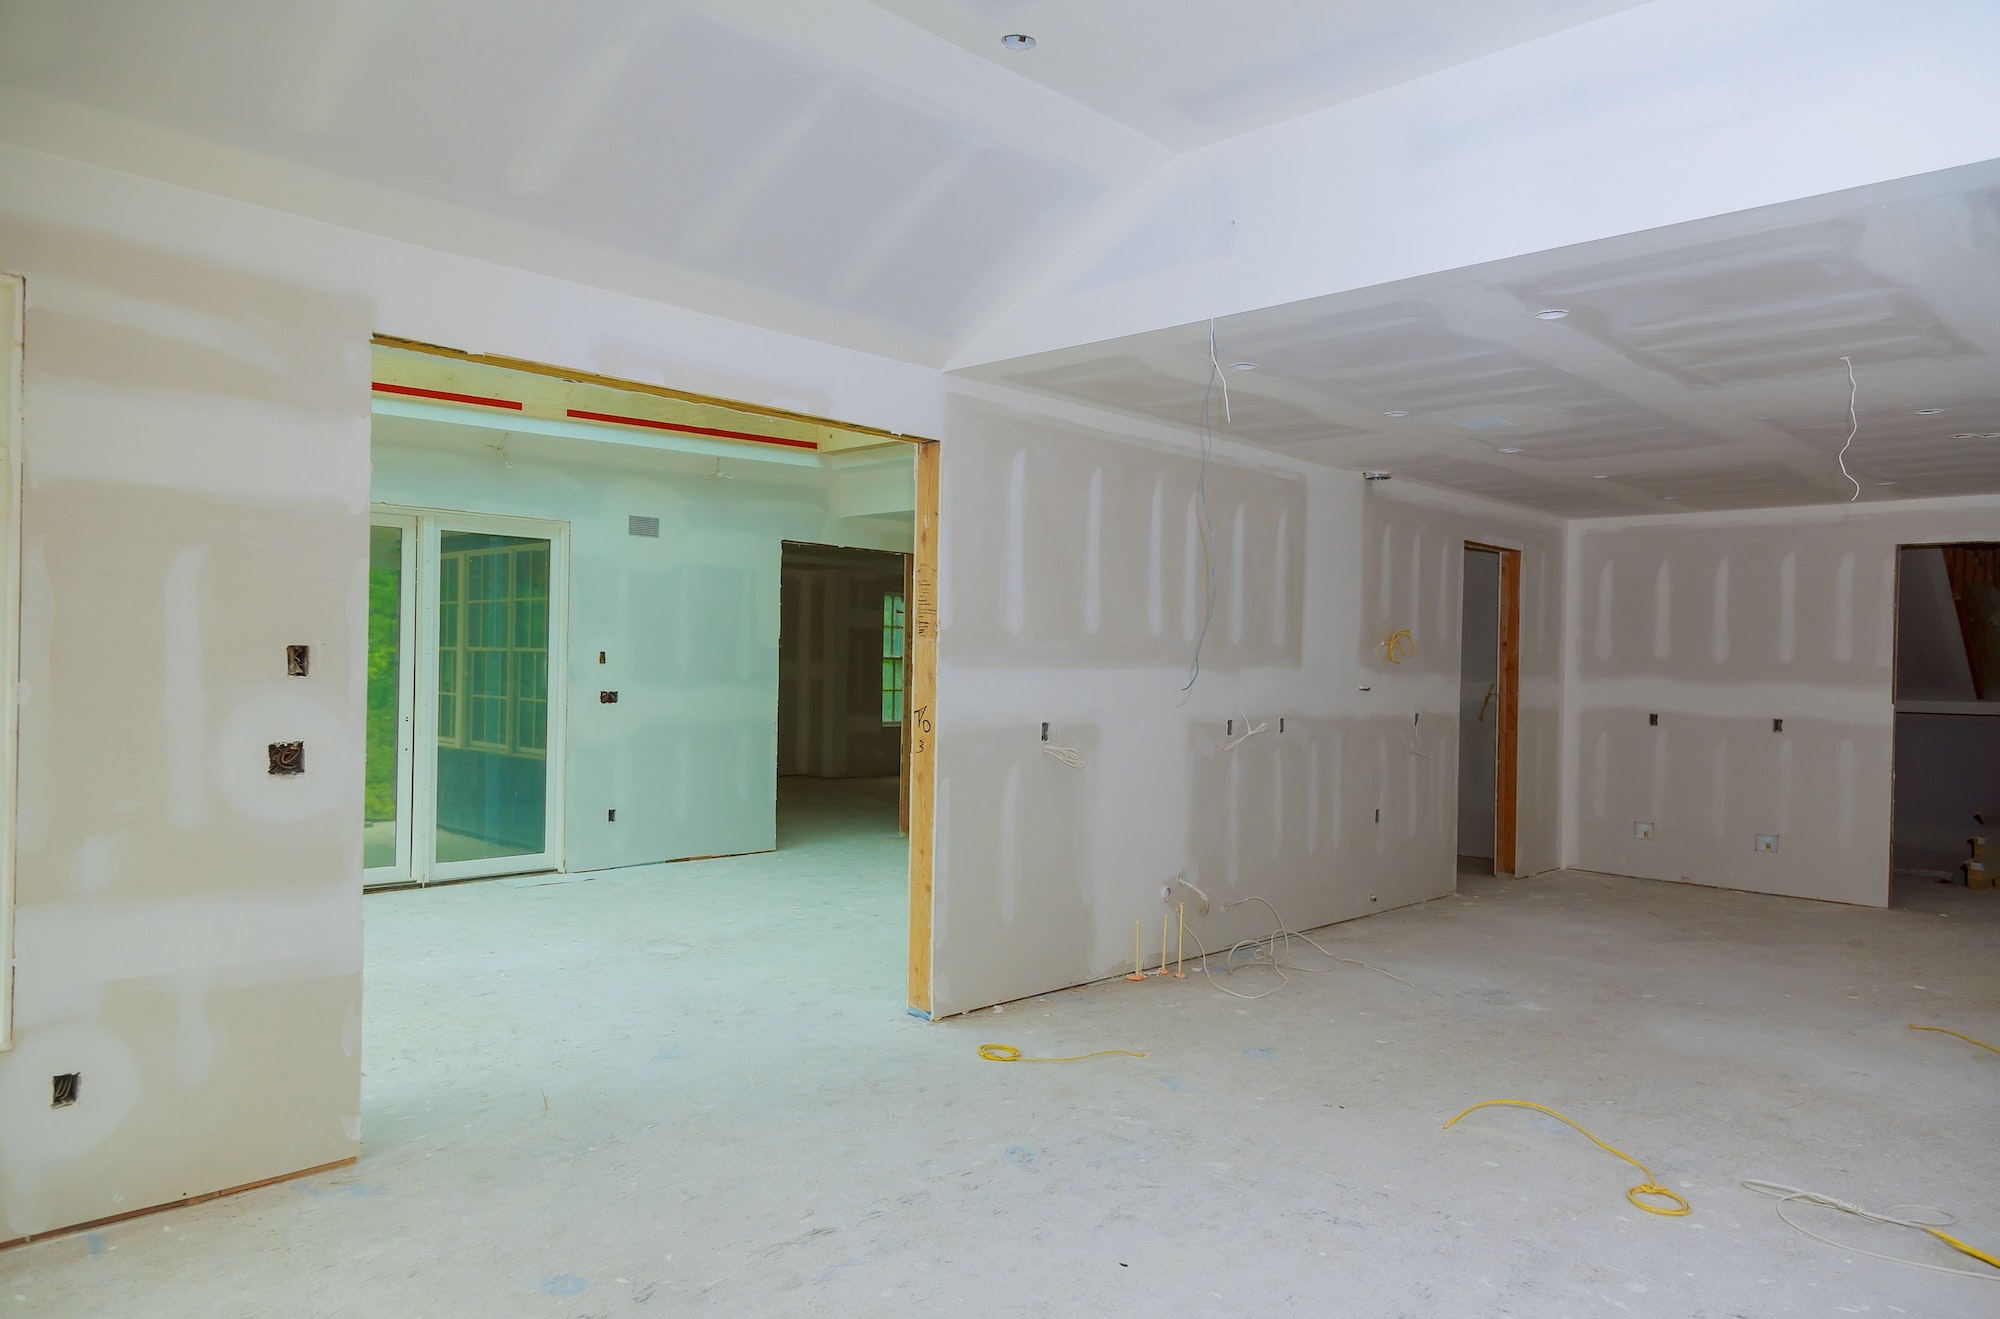 Close up on ceiling construction details with building gypsum plaster walls and ceiling of home